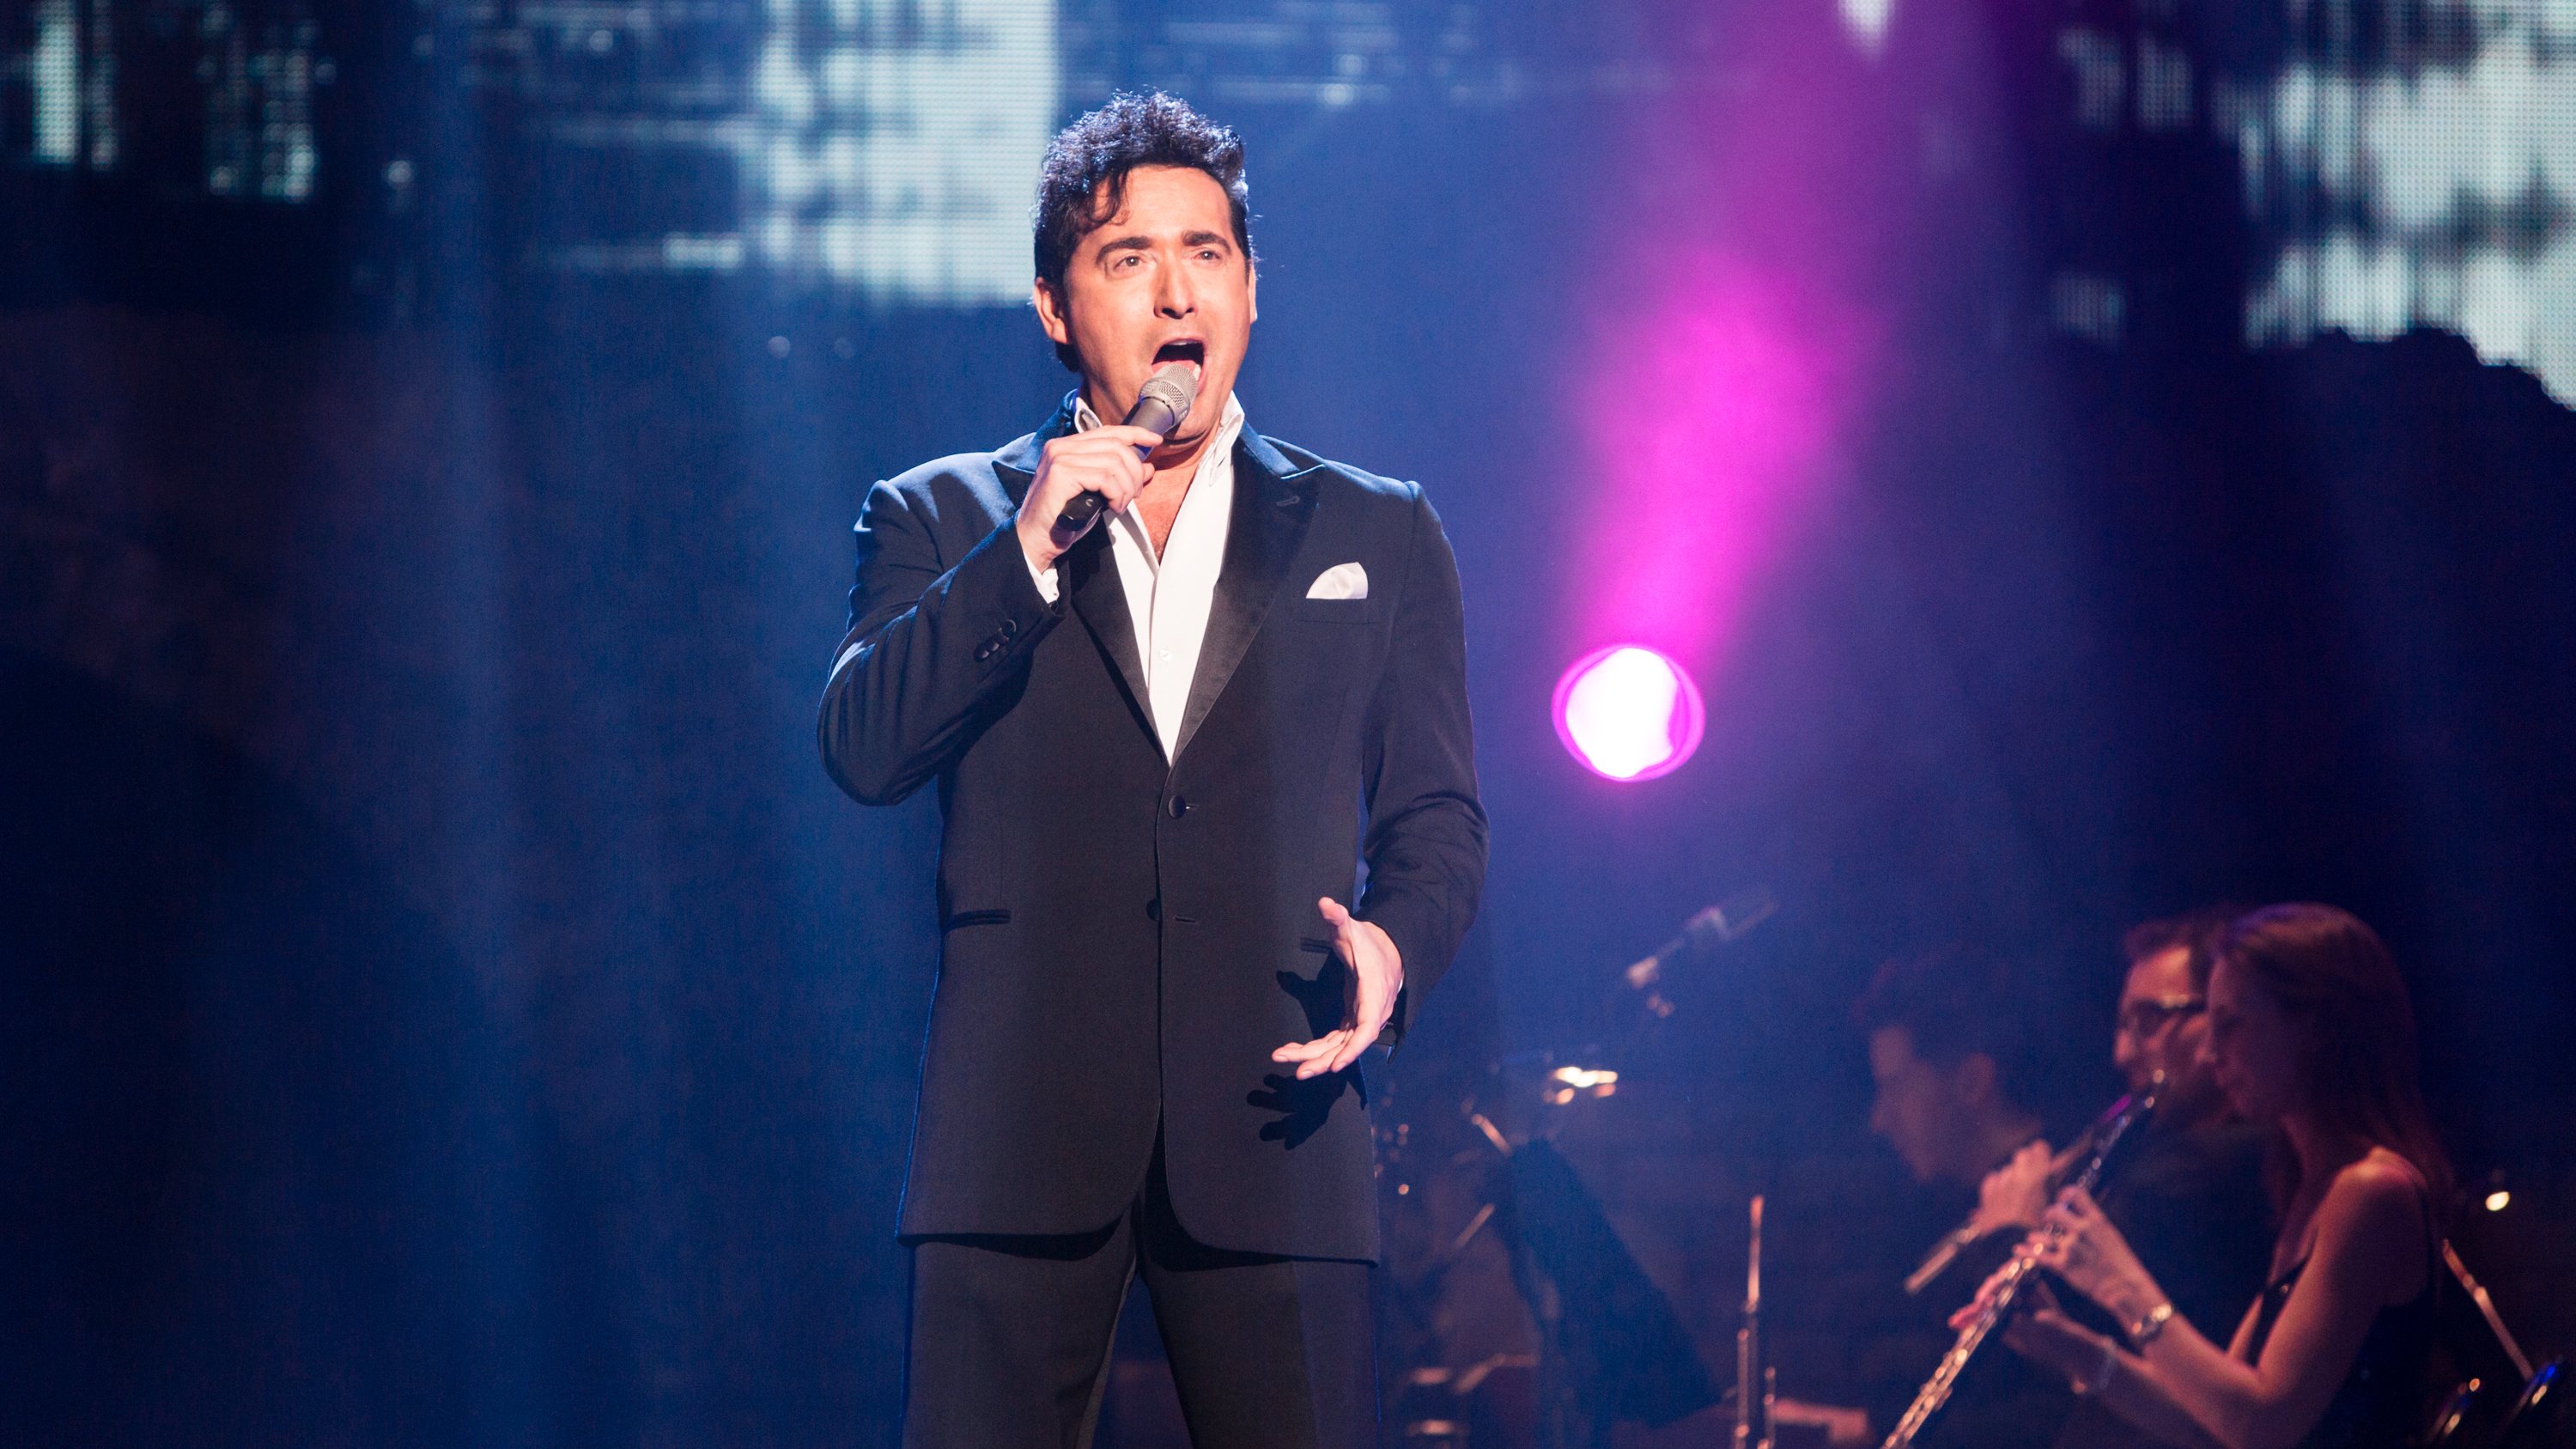 Il Divo Perform At First Direct Arena In Leeds